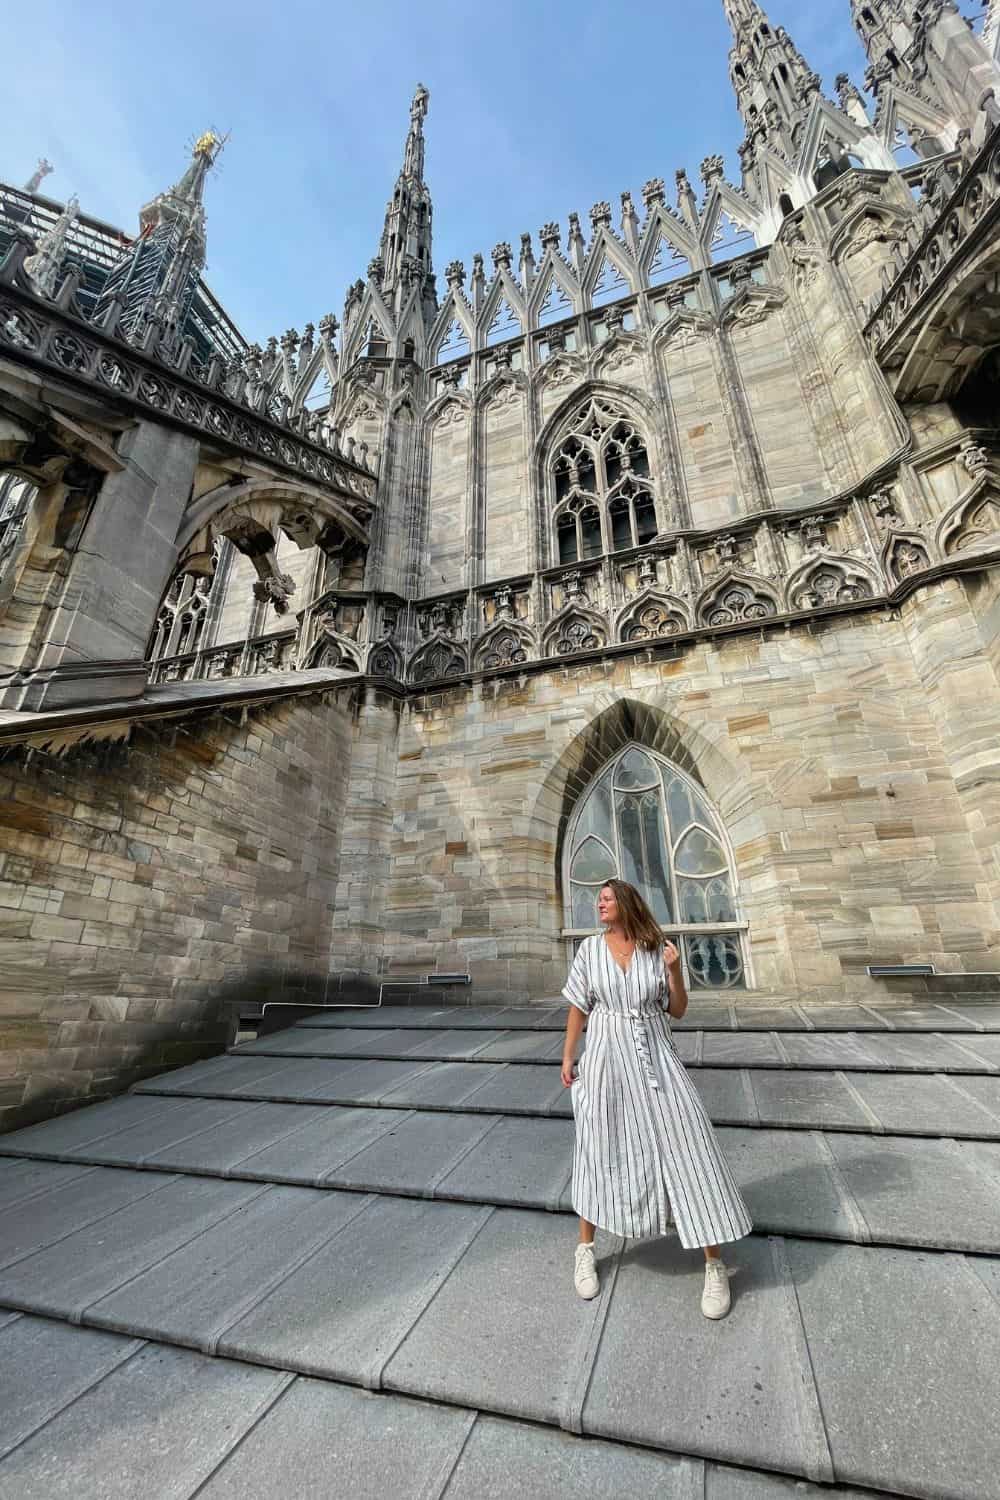 A woman in a striped dress stands on the rooftop of Milan Cathedral, with gothic spires rising behind her against a clear blue sky. She appears relaxed, gazing into the distance, capturing the grandeur of the historic architecture.